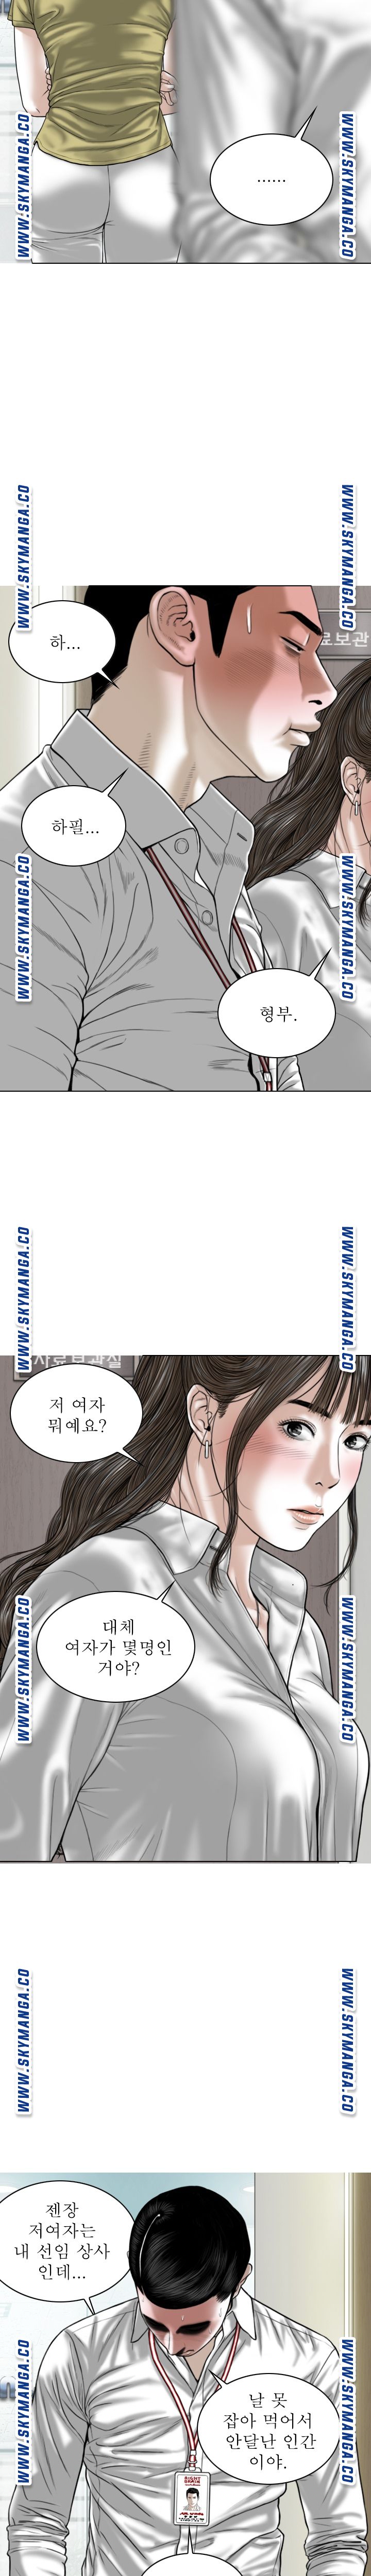 Female Friend Raw - Chapter 18 Page 3